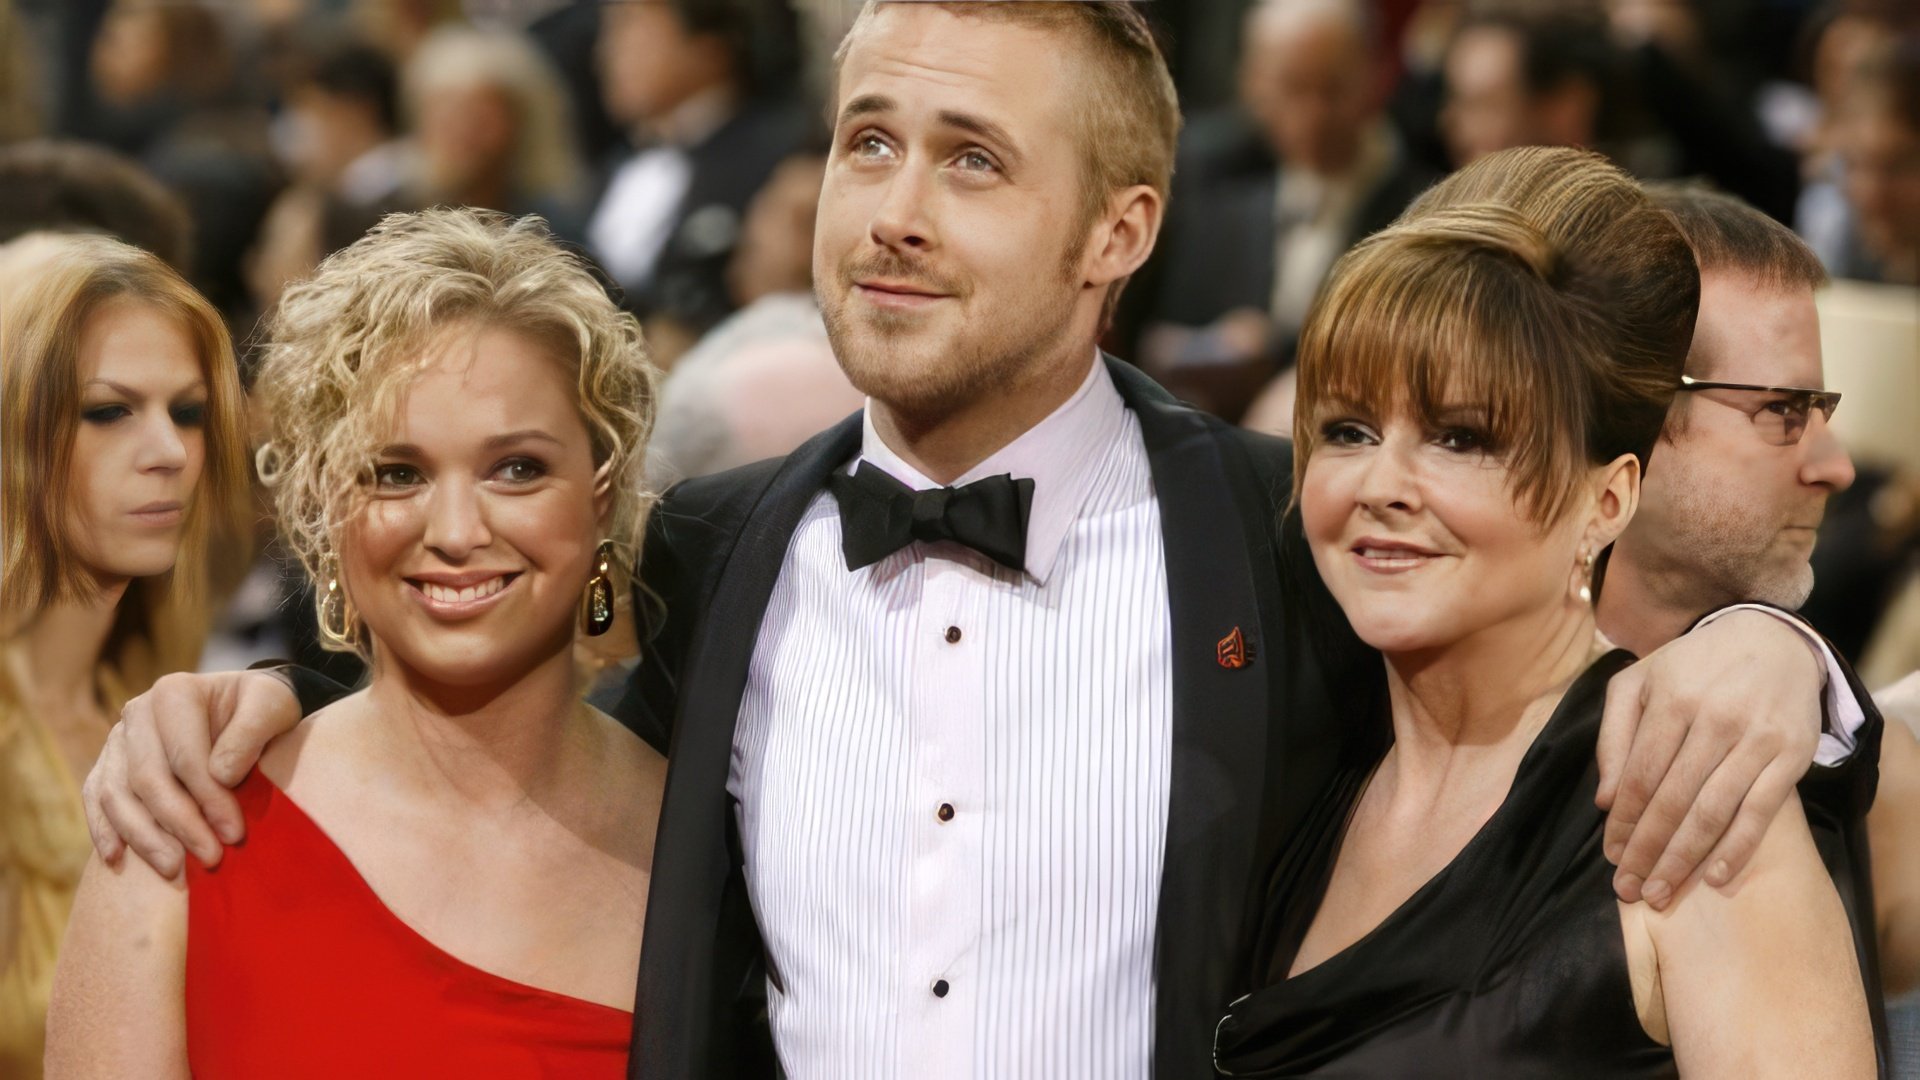 Ryan Gosling with his closest and beloved relatives, a mother and sister